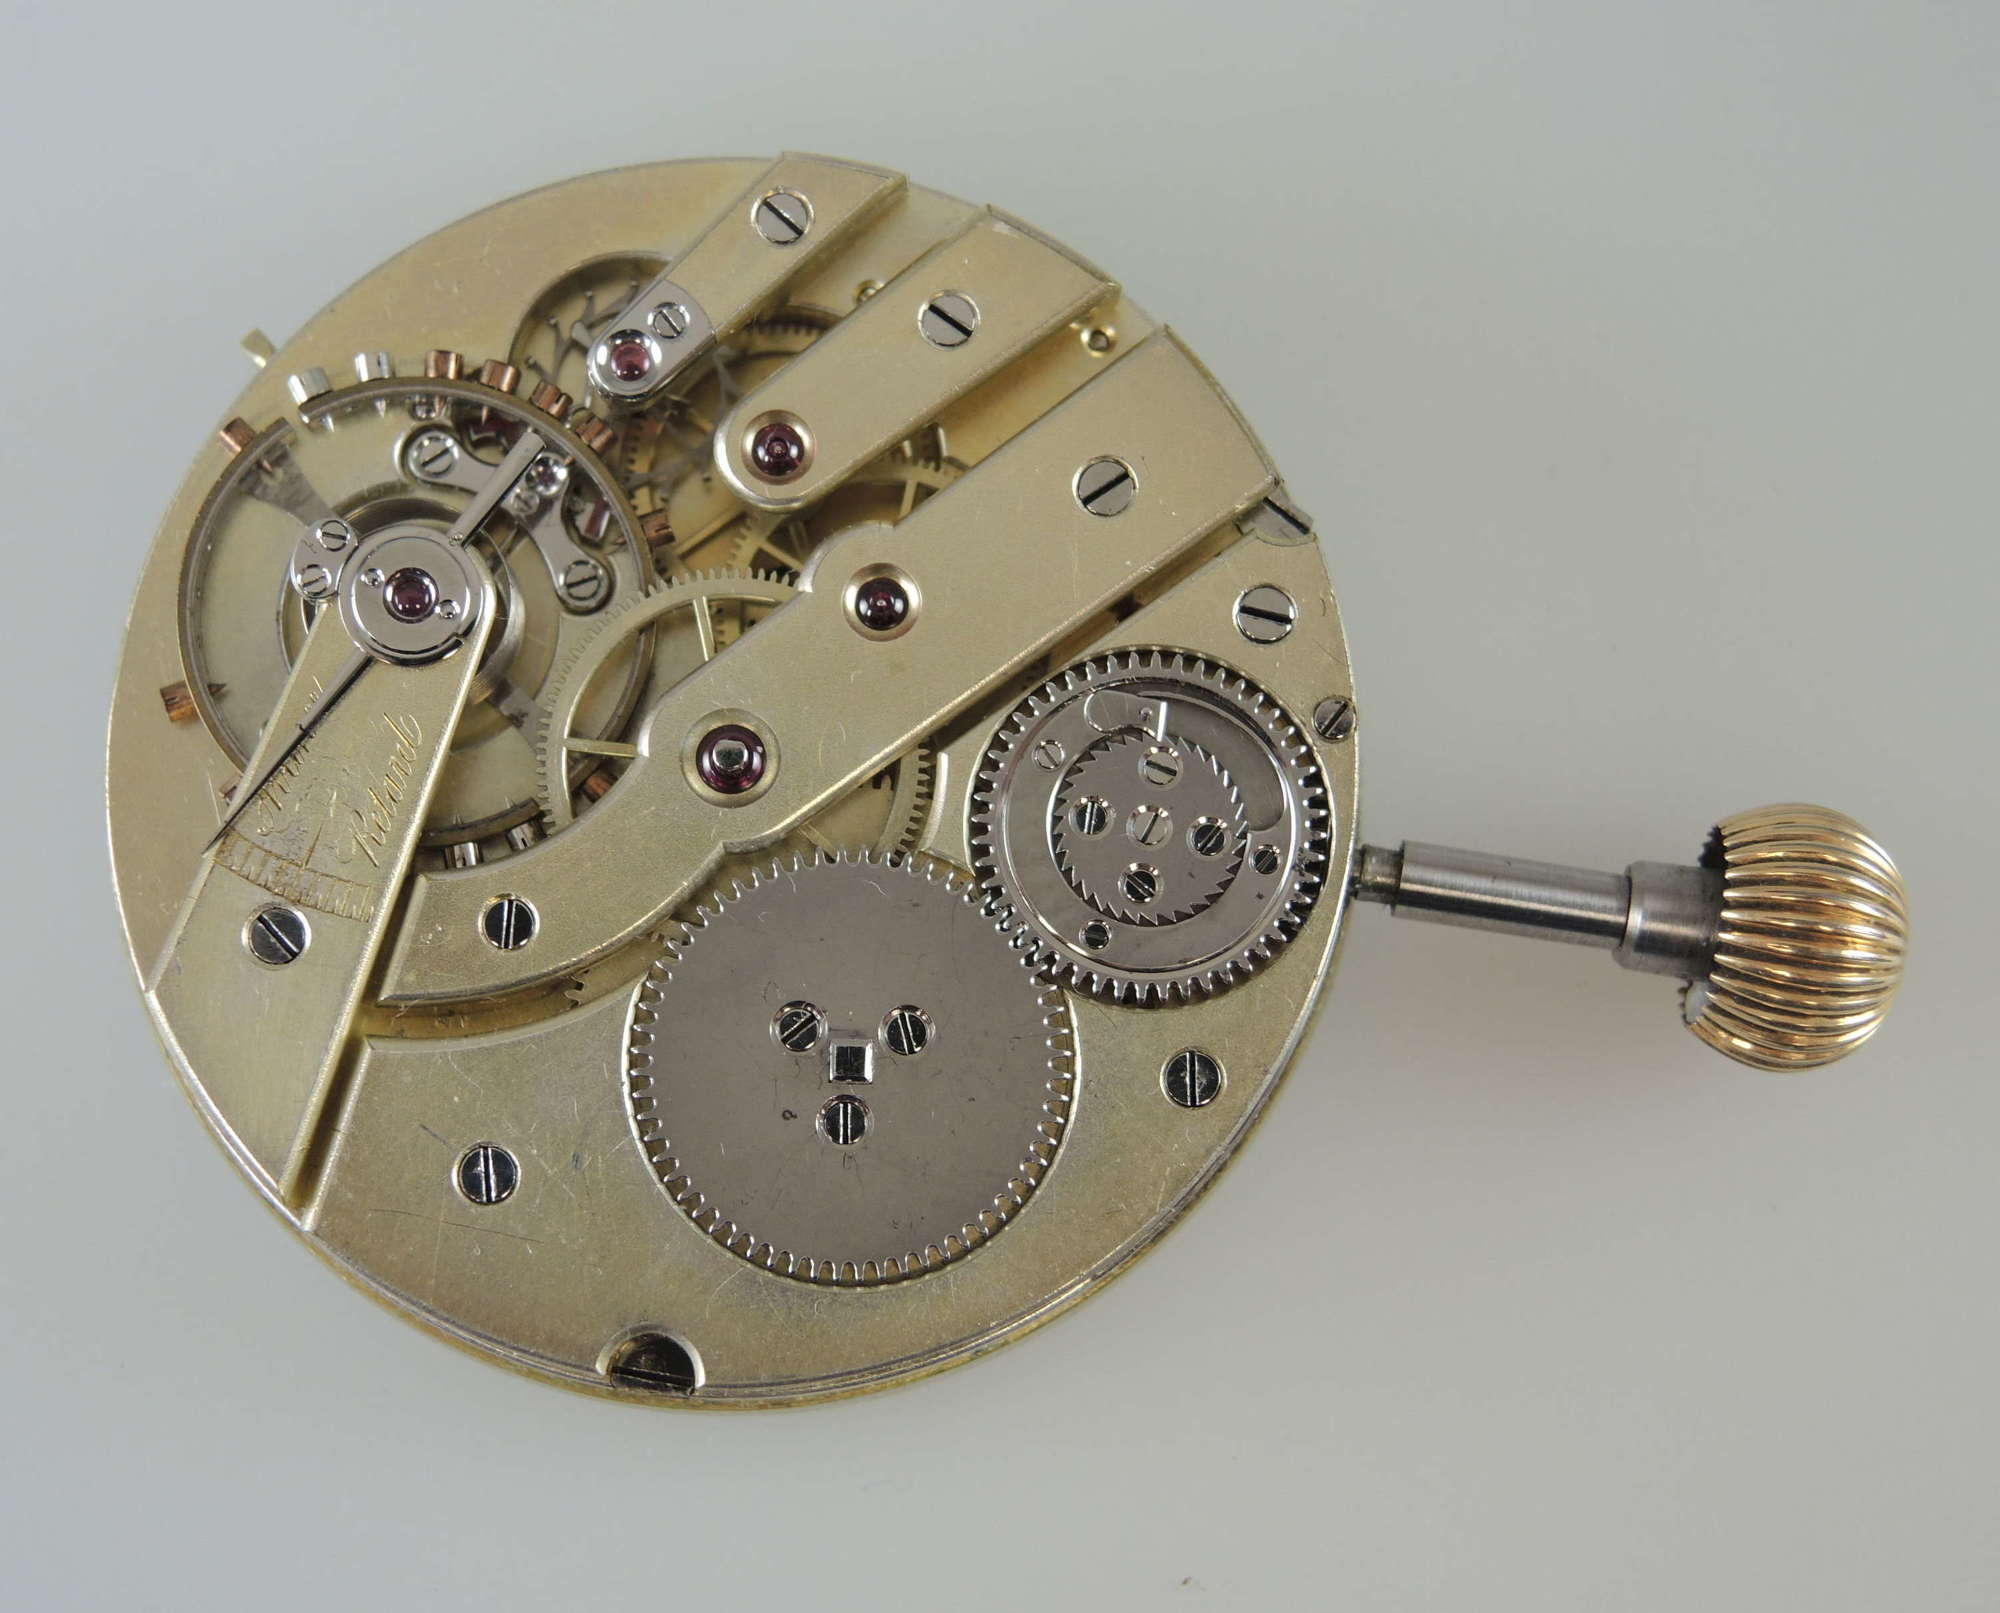 Rare Swiss pocket watch movement with a steel helical hairspring c1890